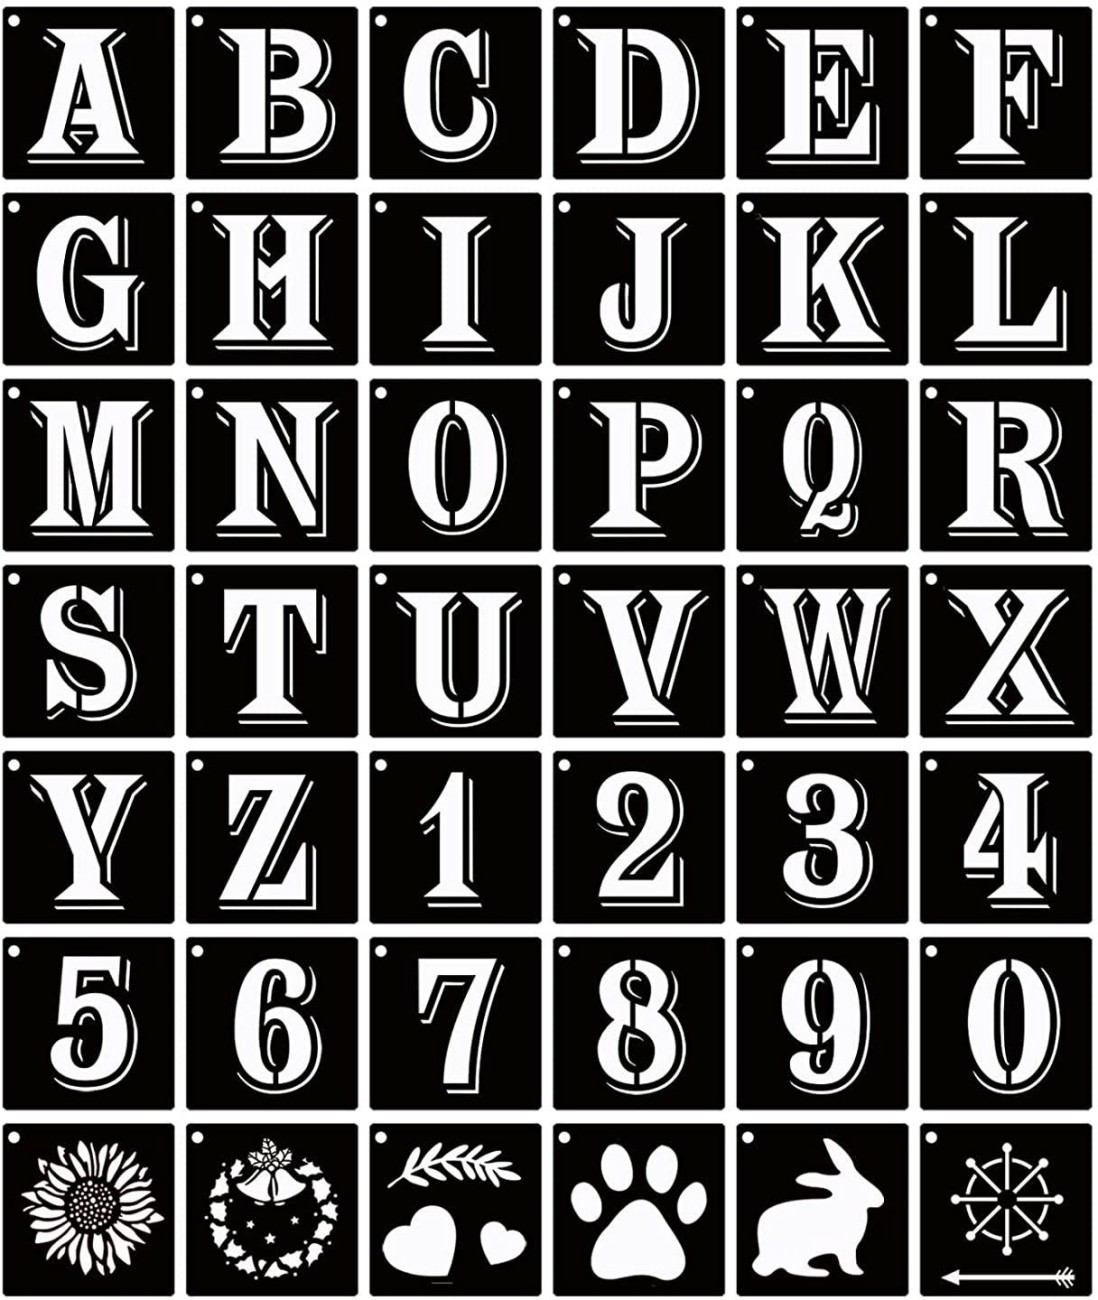 4'' Letter Stencils, 36 Pcs Reusable Plastic Letter Stencils Alphabet  Number Templates for Painting on Wood, Wall, Fabric, Rock, Chalkboard,  Signage